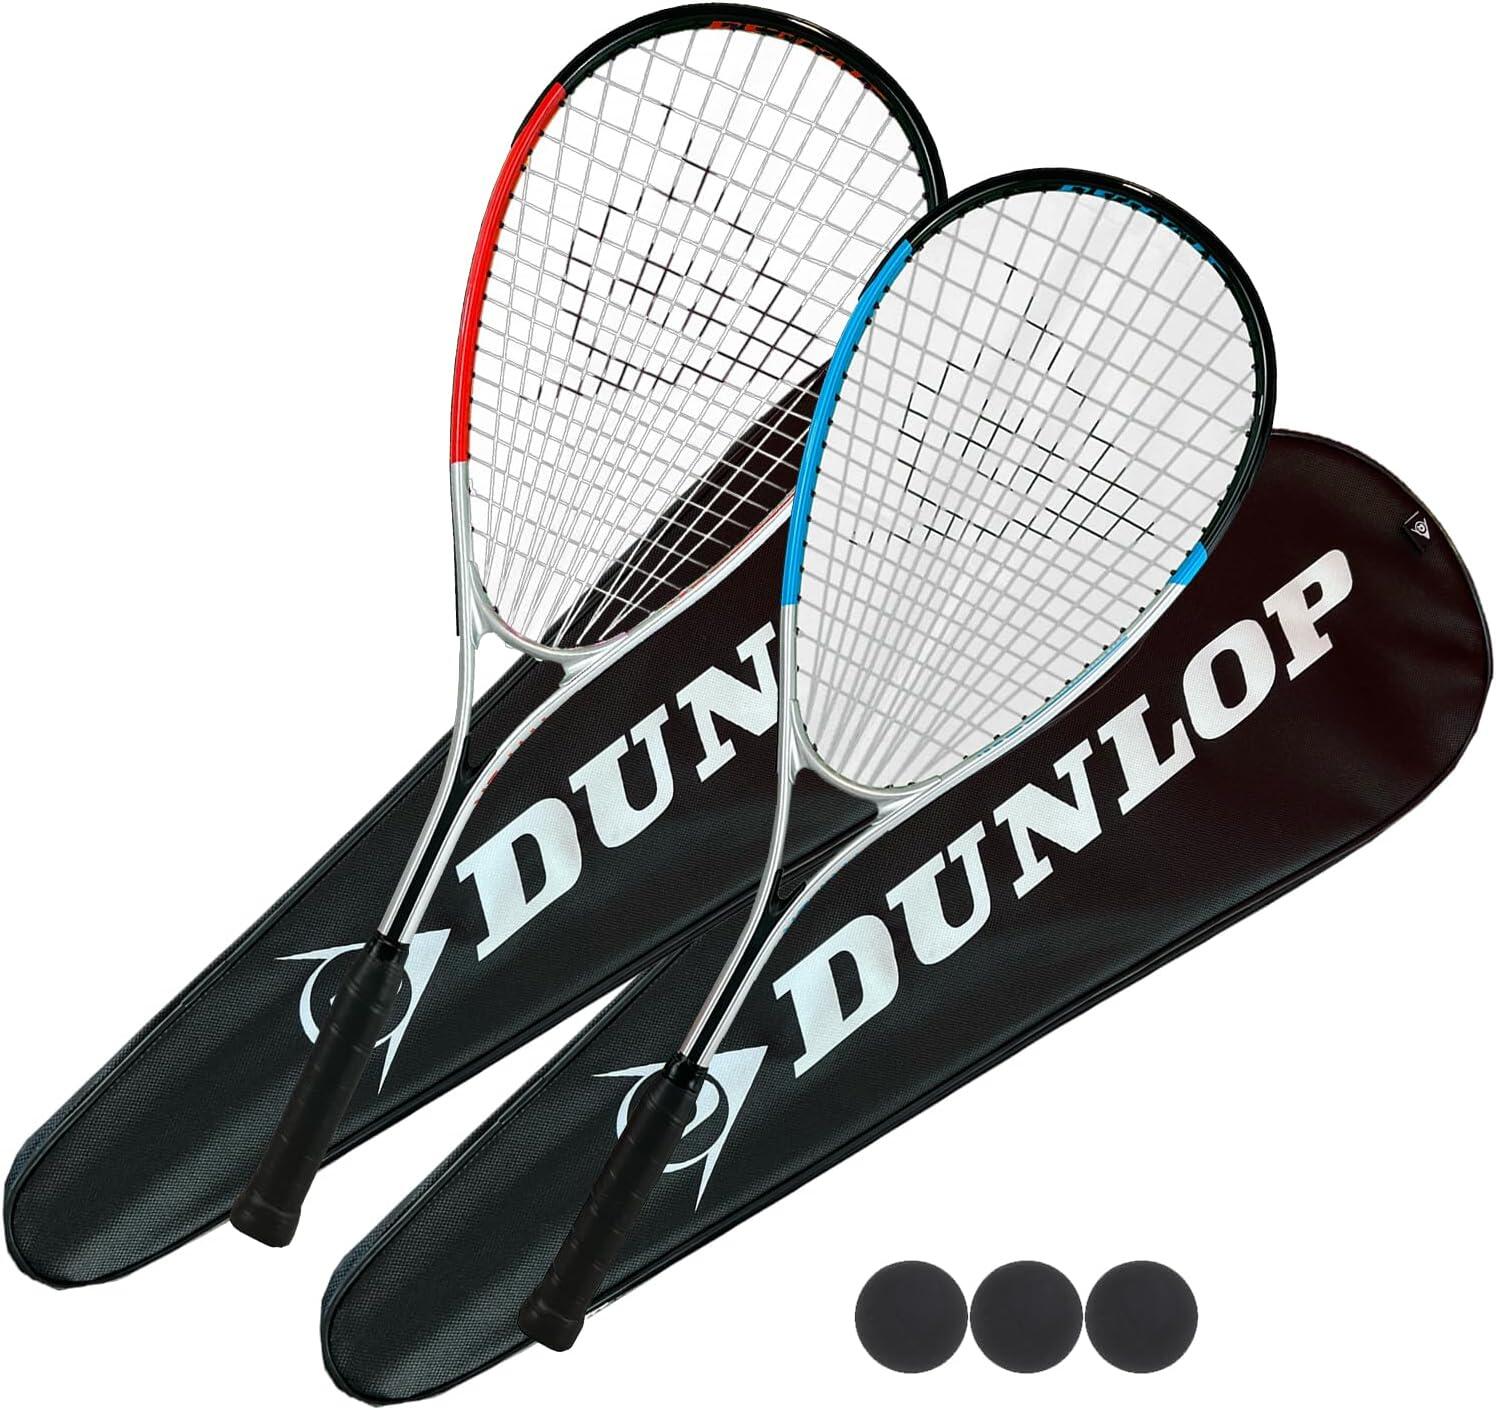 Dunlop Hyper Squash Racket Deluxe Squash Set, inc Full Length Protective Covers 1/1